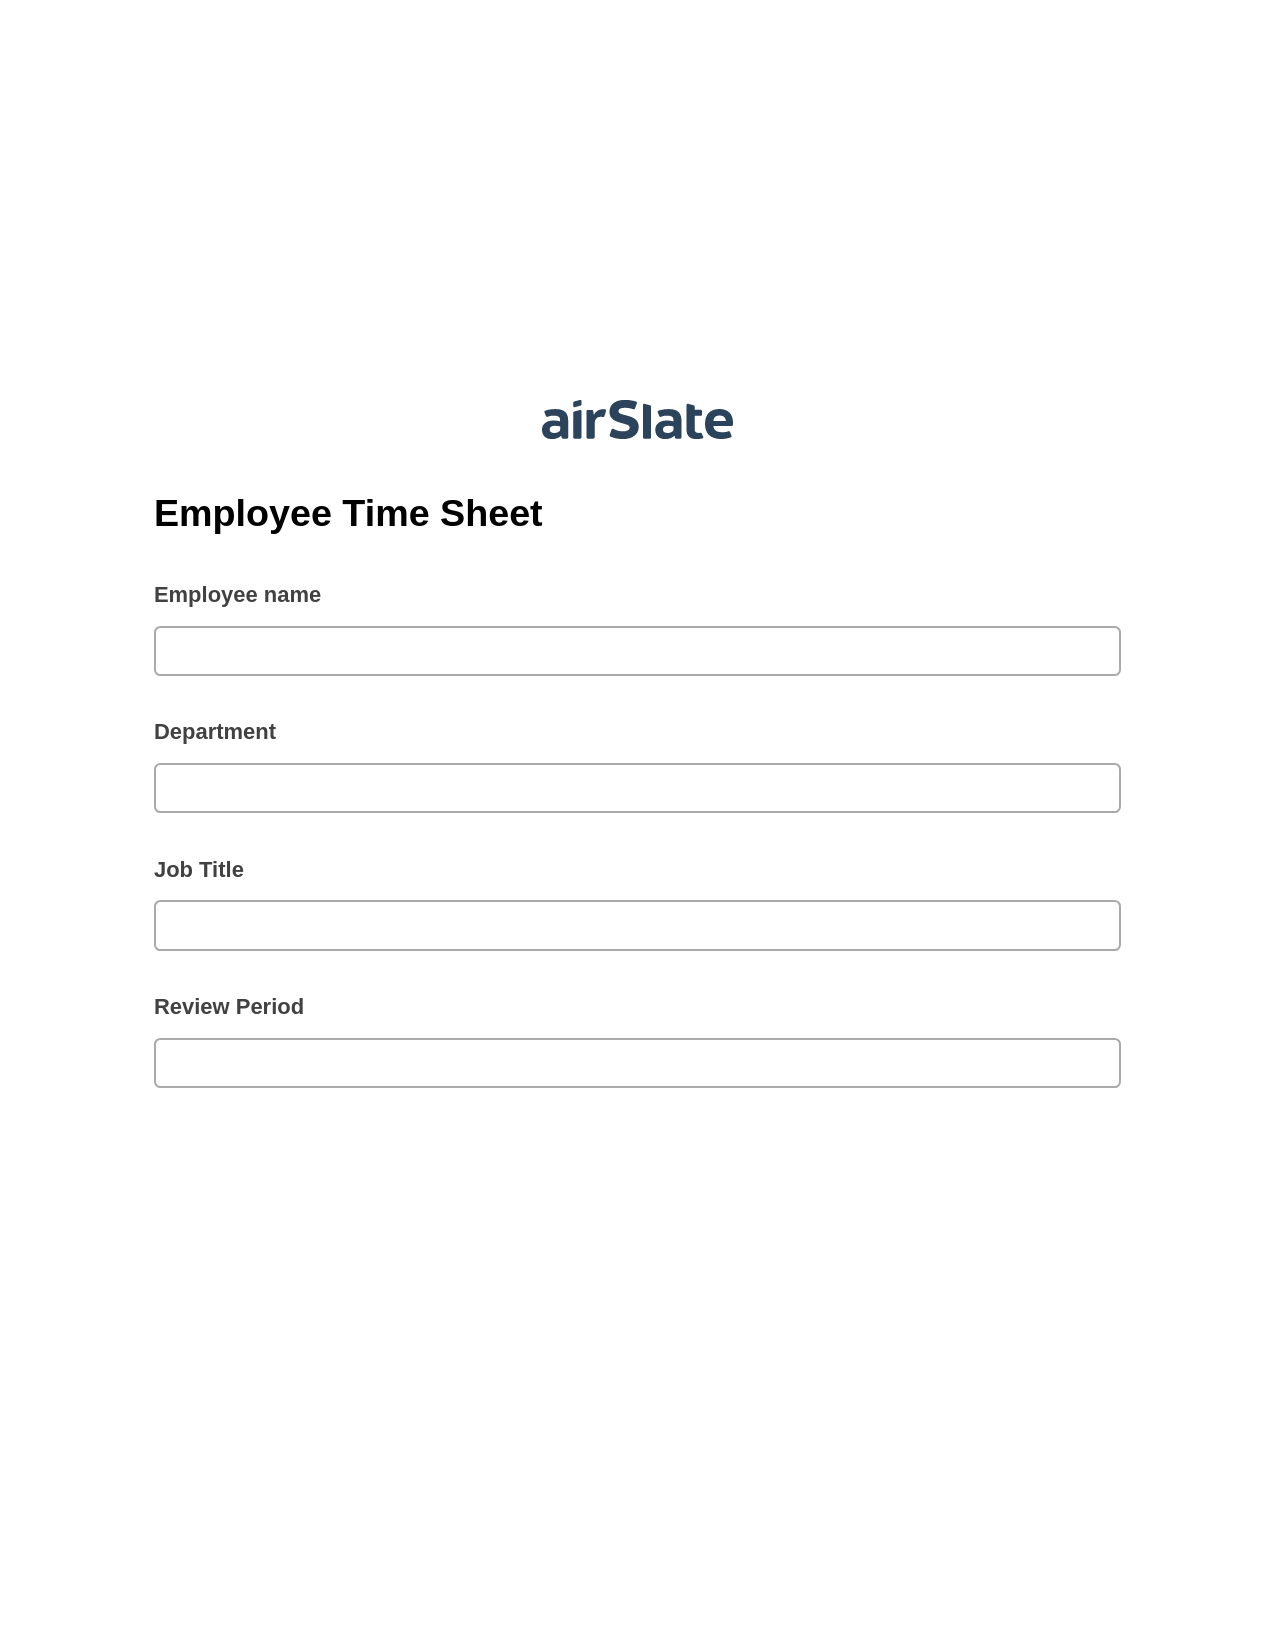 Multirole Employee Time Sheet Pre-fill from Smartsheet Bot, Update Audit Trail Bot, Archive to OneDrive Bot